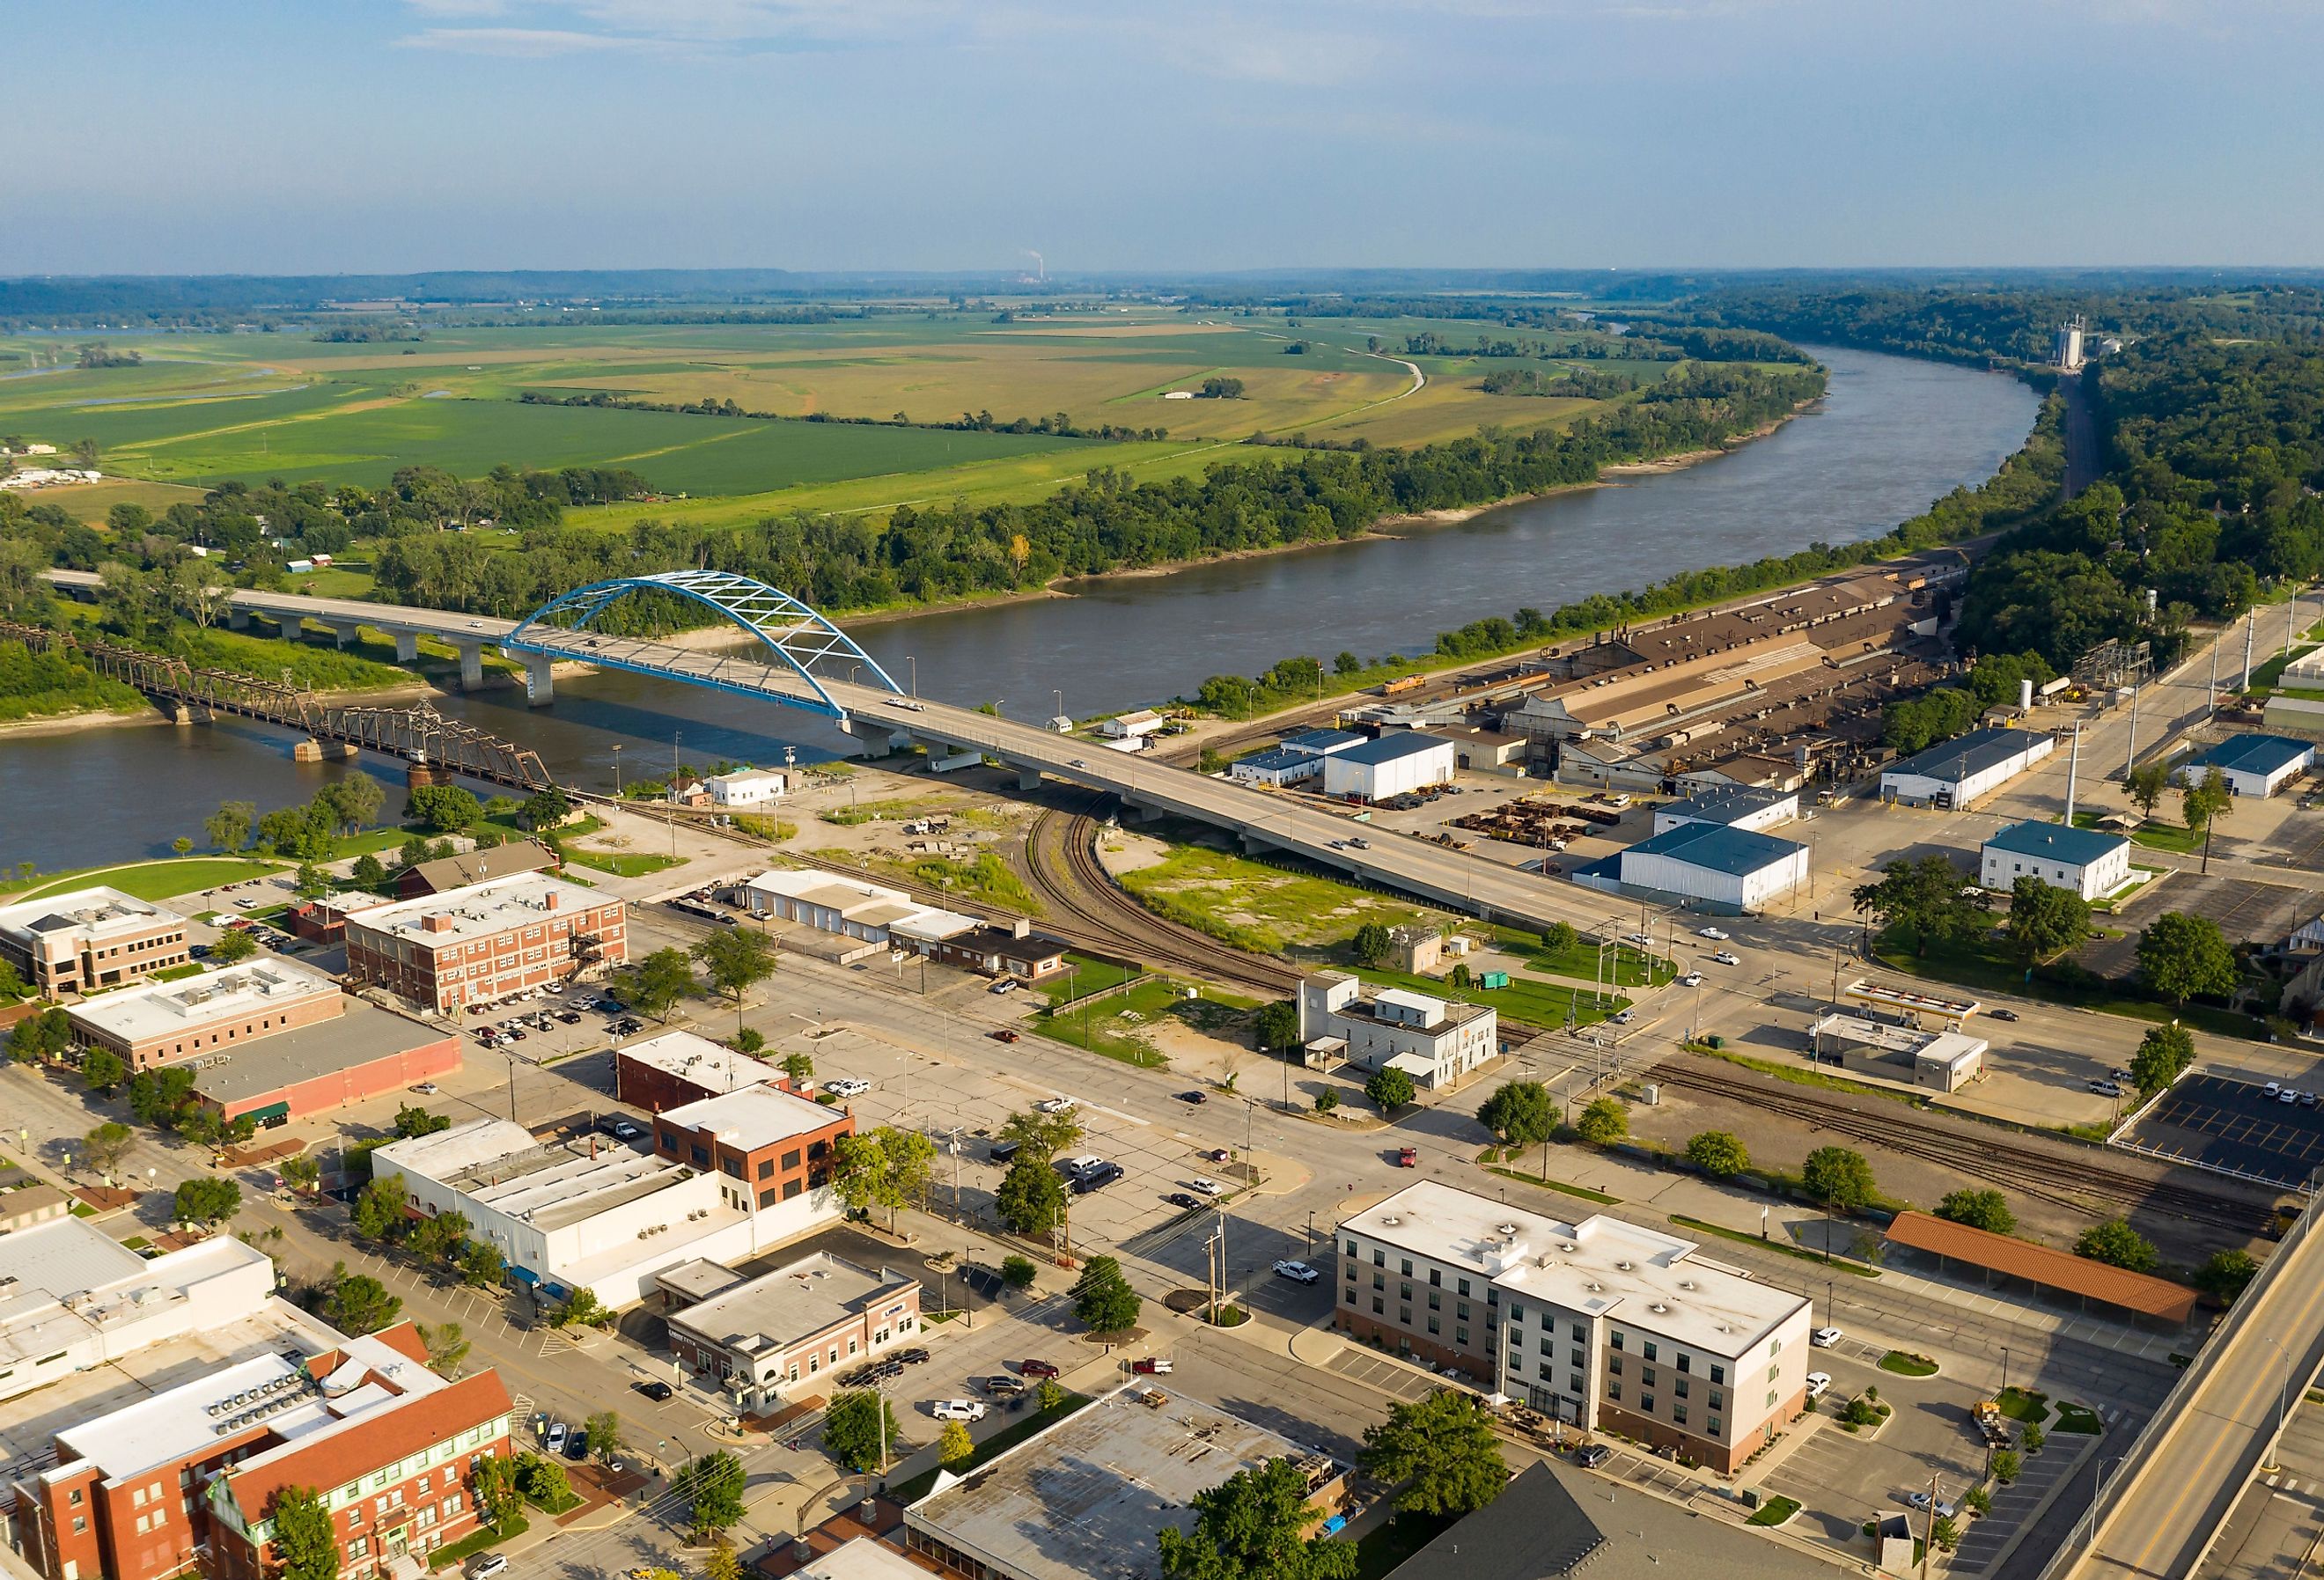 Aerial view over downtown city center of Atchison Kansas in mid morning light.